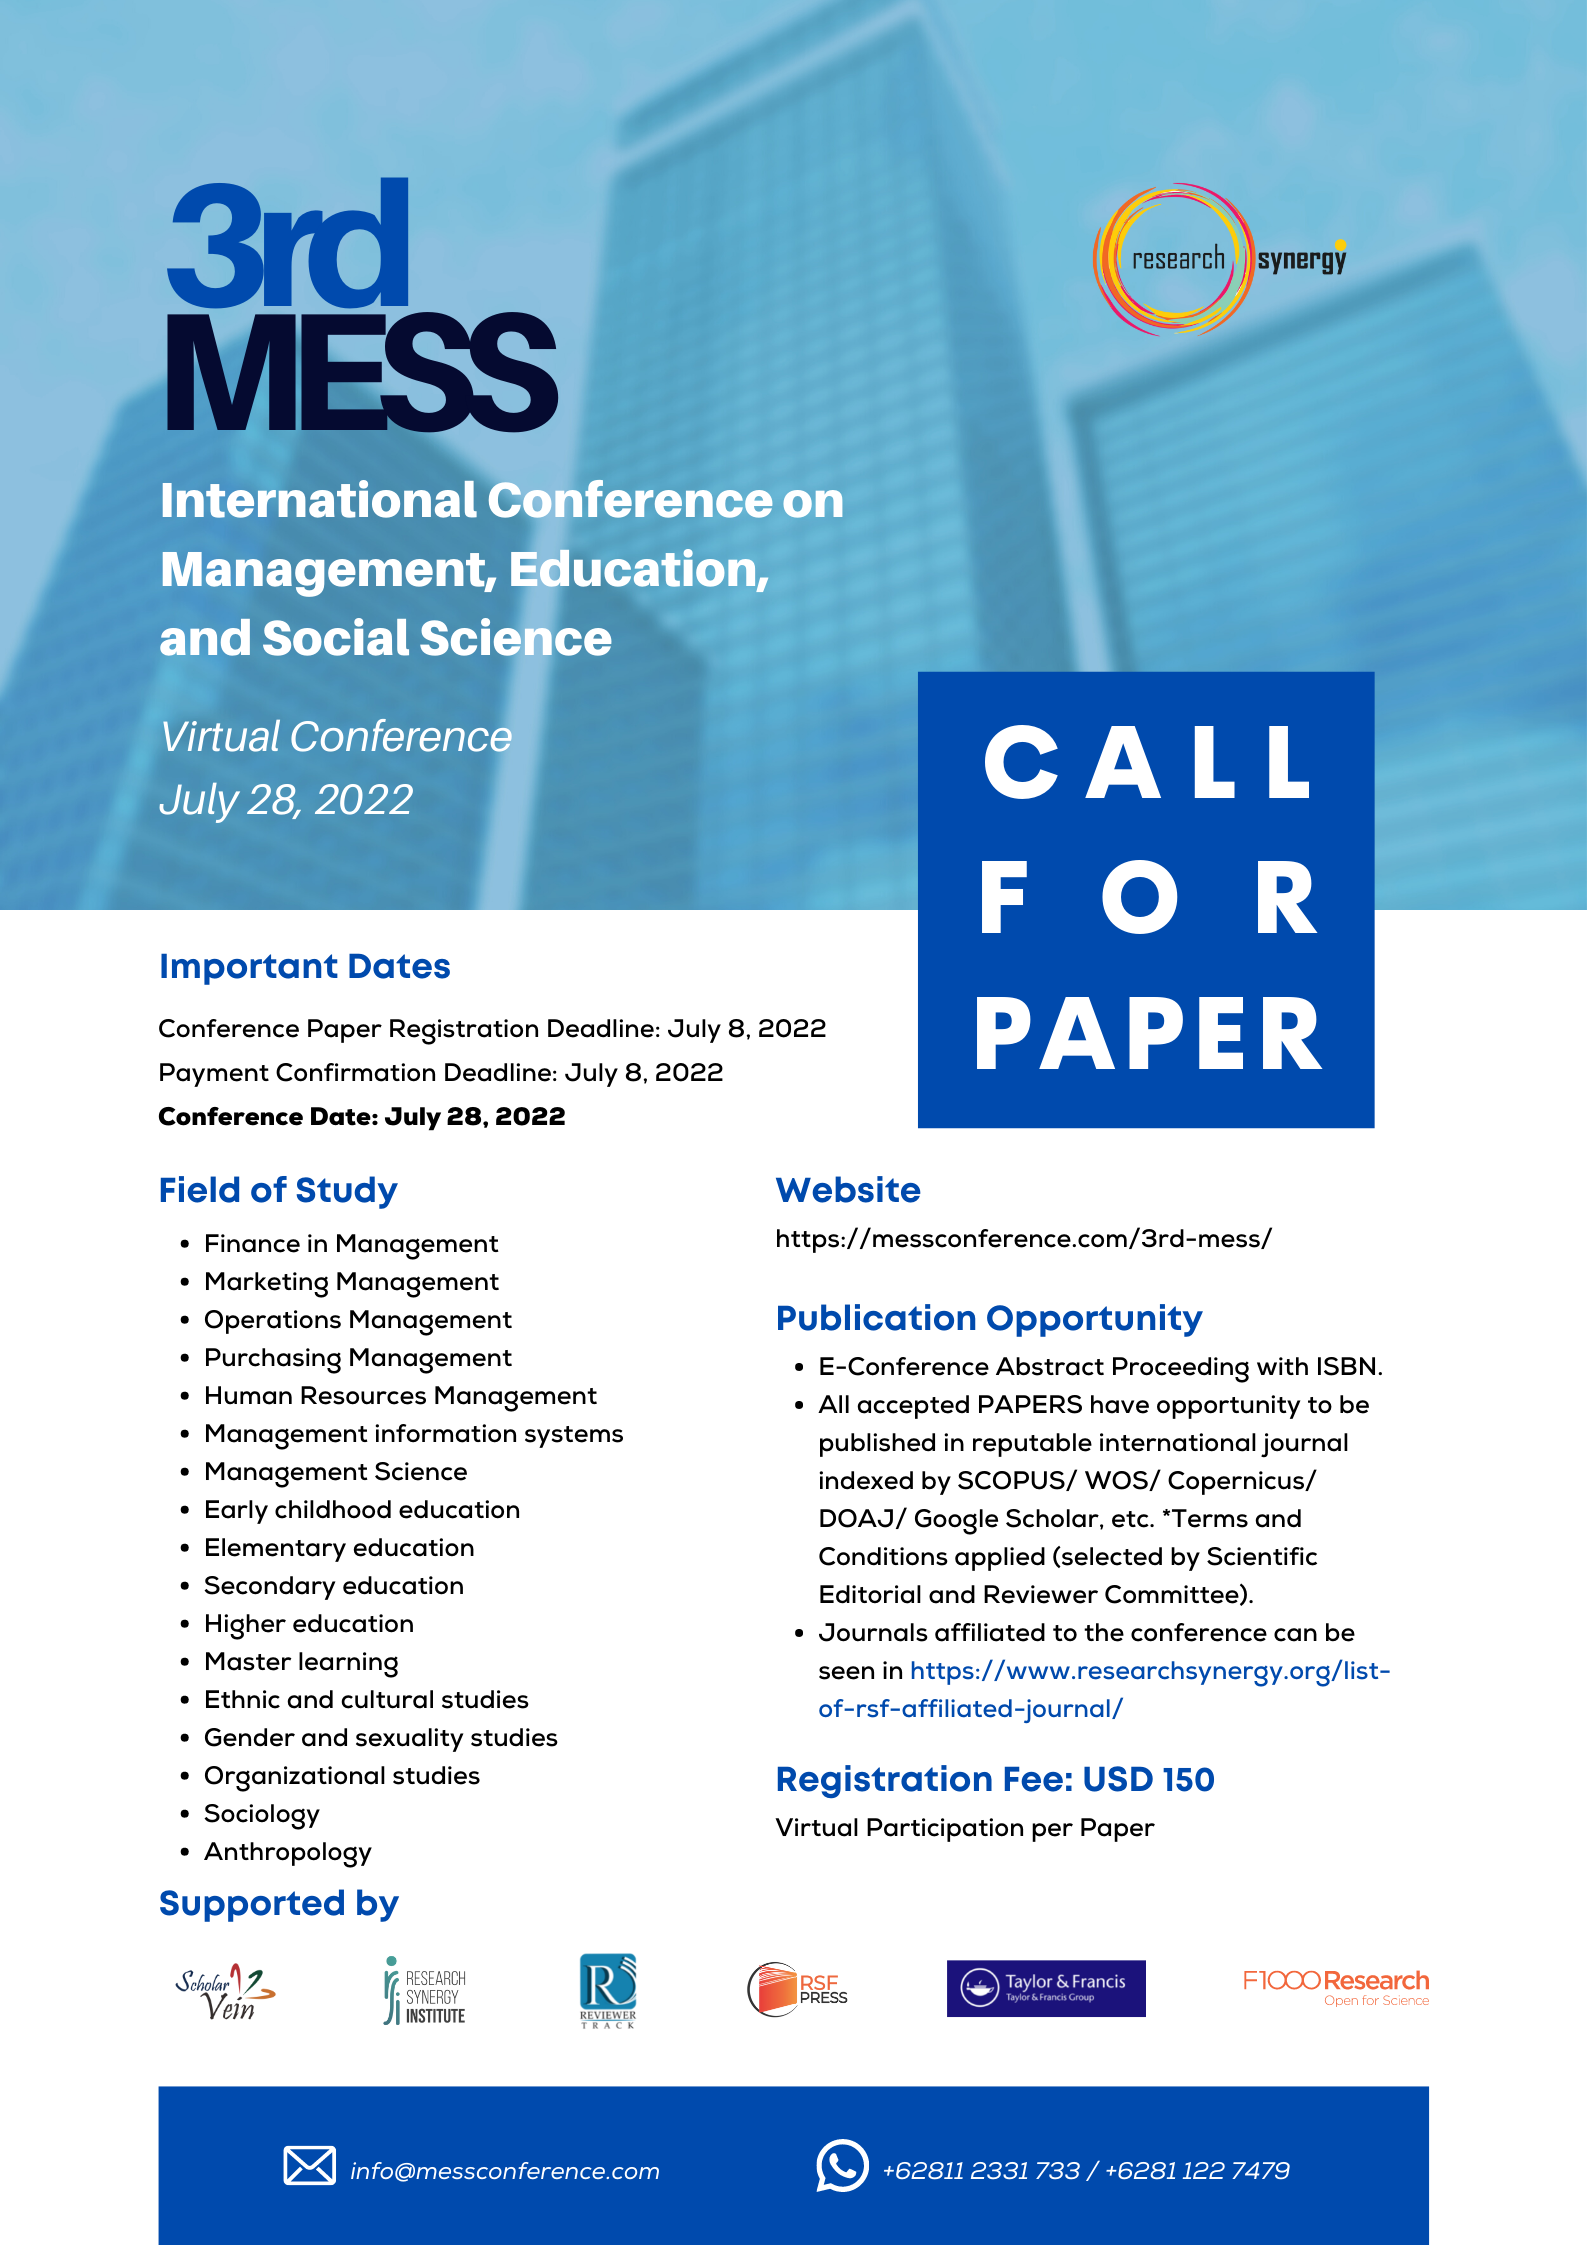 3rd mess - poster conference_2